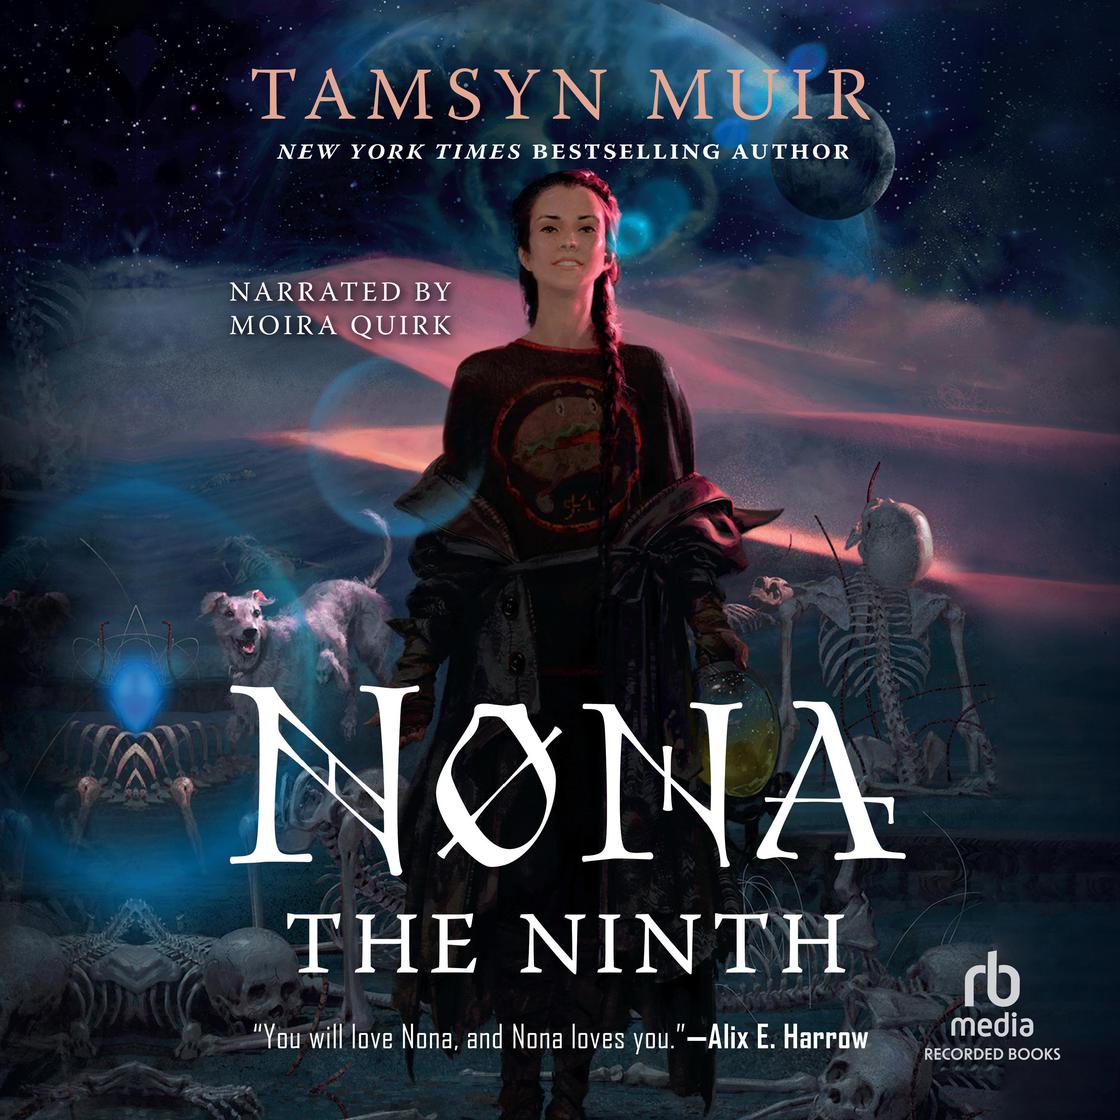 Tamsyn Muir: Nona the Ninth (AudiobookFormat, 2022, Recorded Books, Inc.)